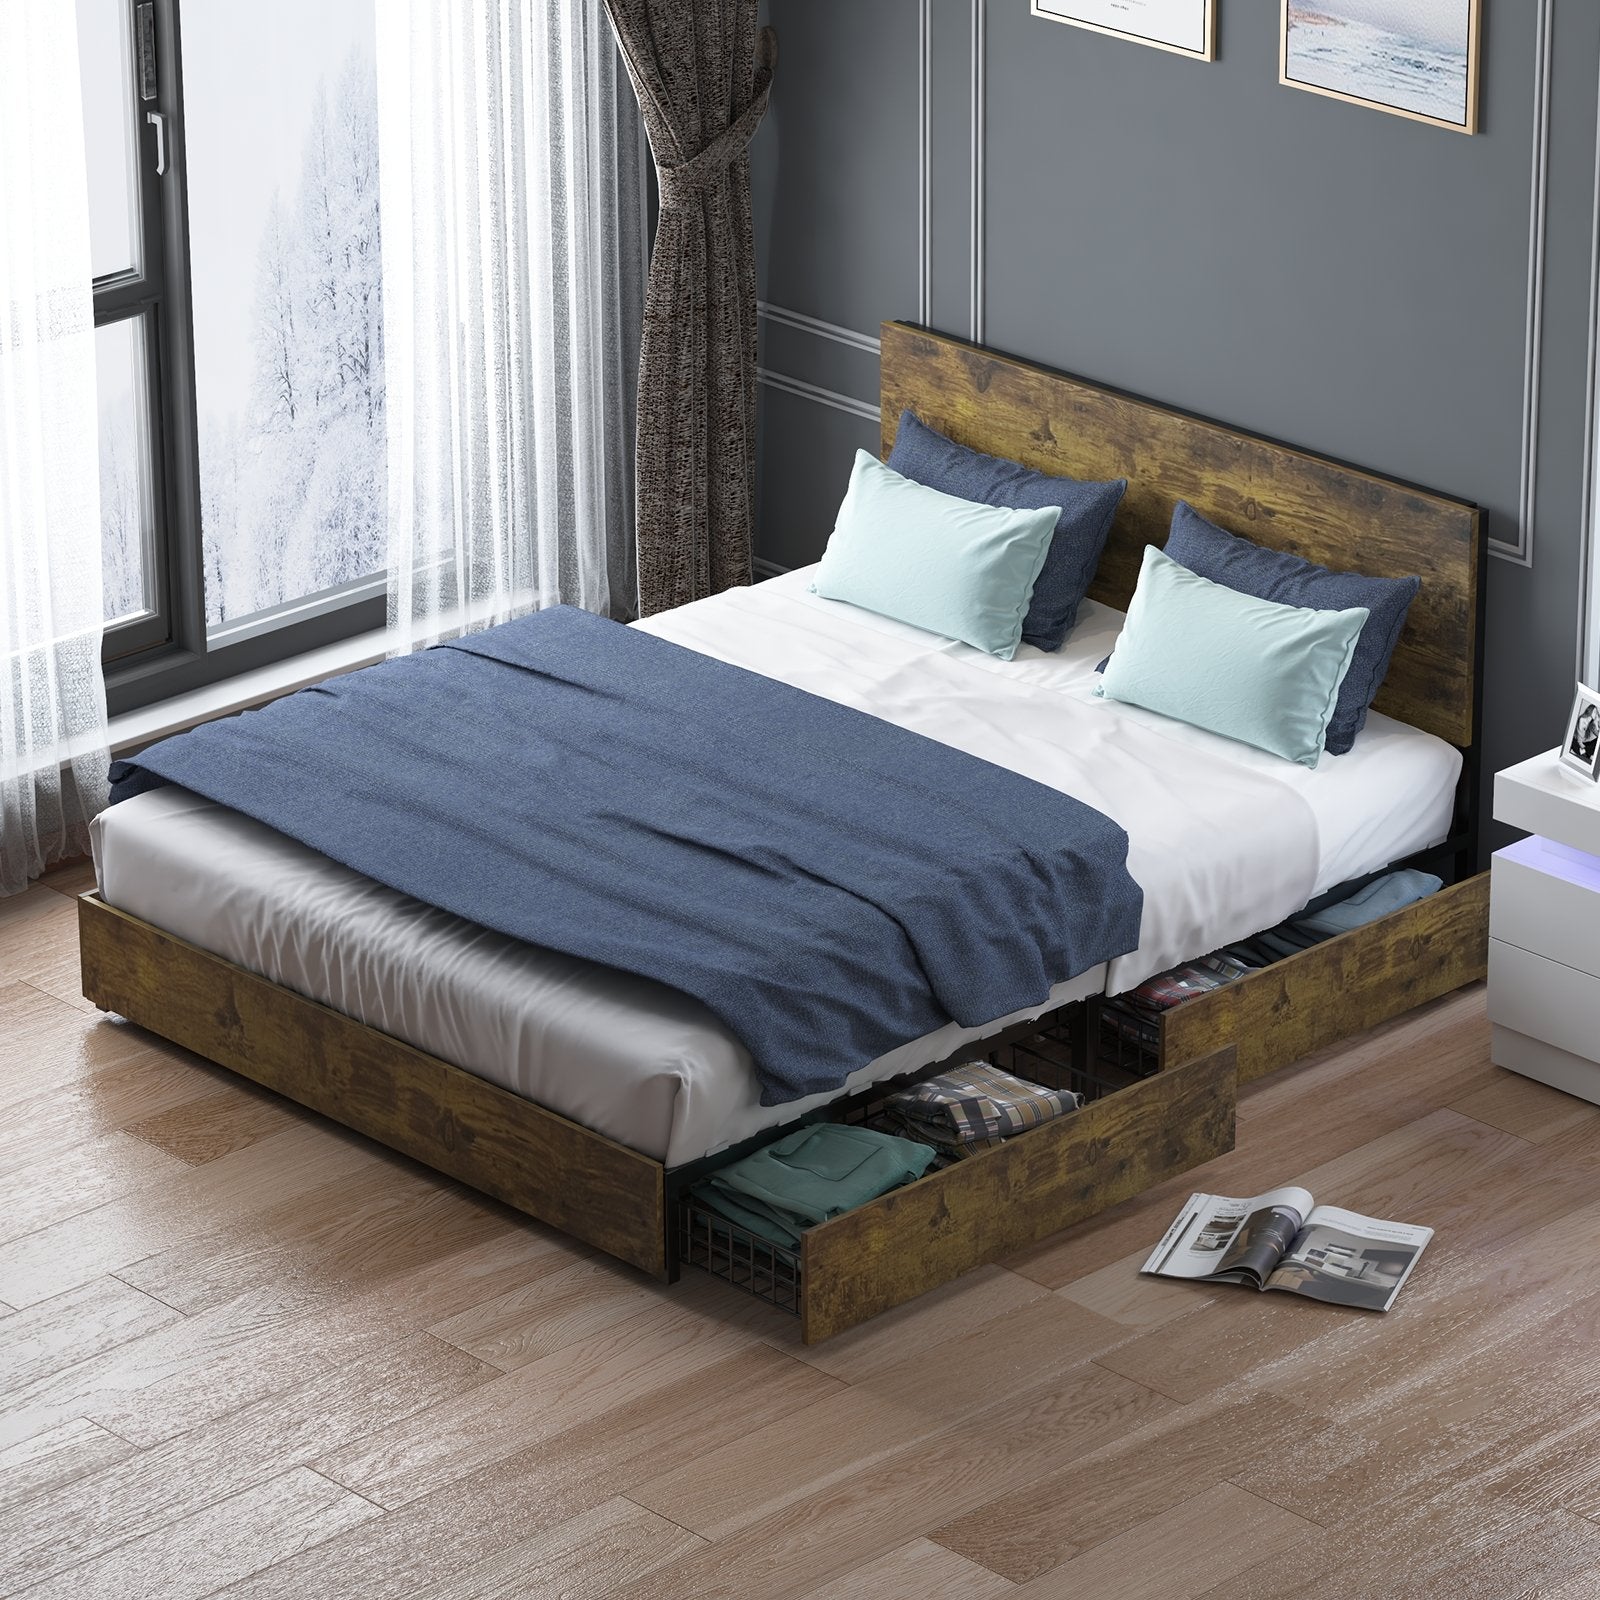 Drawer Bed | Wood Slat Bed Frame With 4 Metal Storage Drawers - uenjoybed